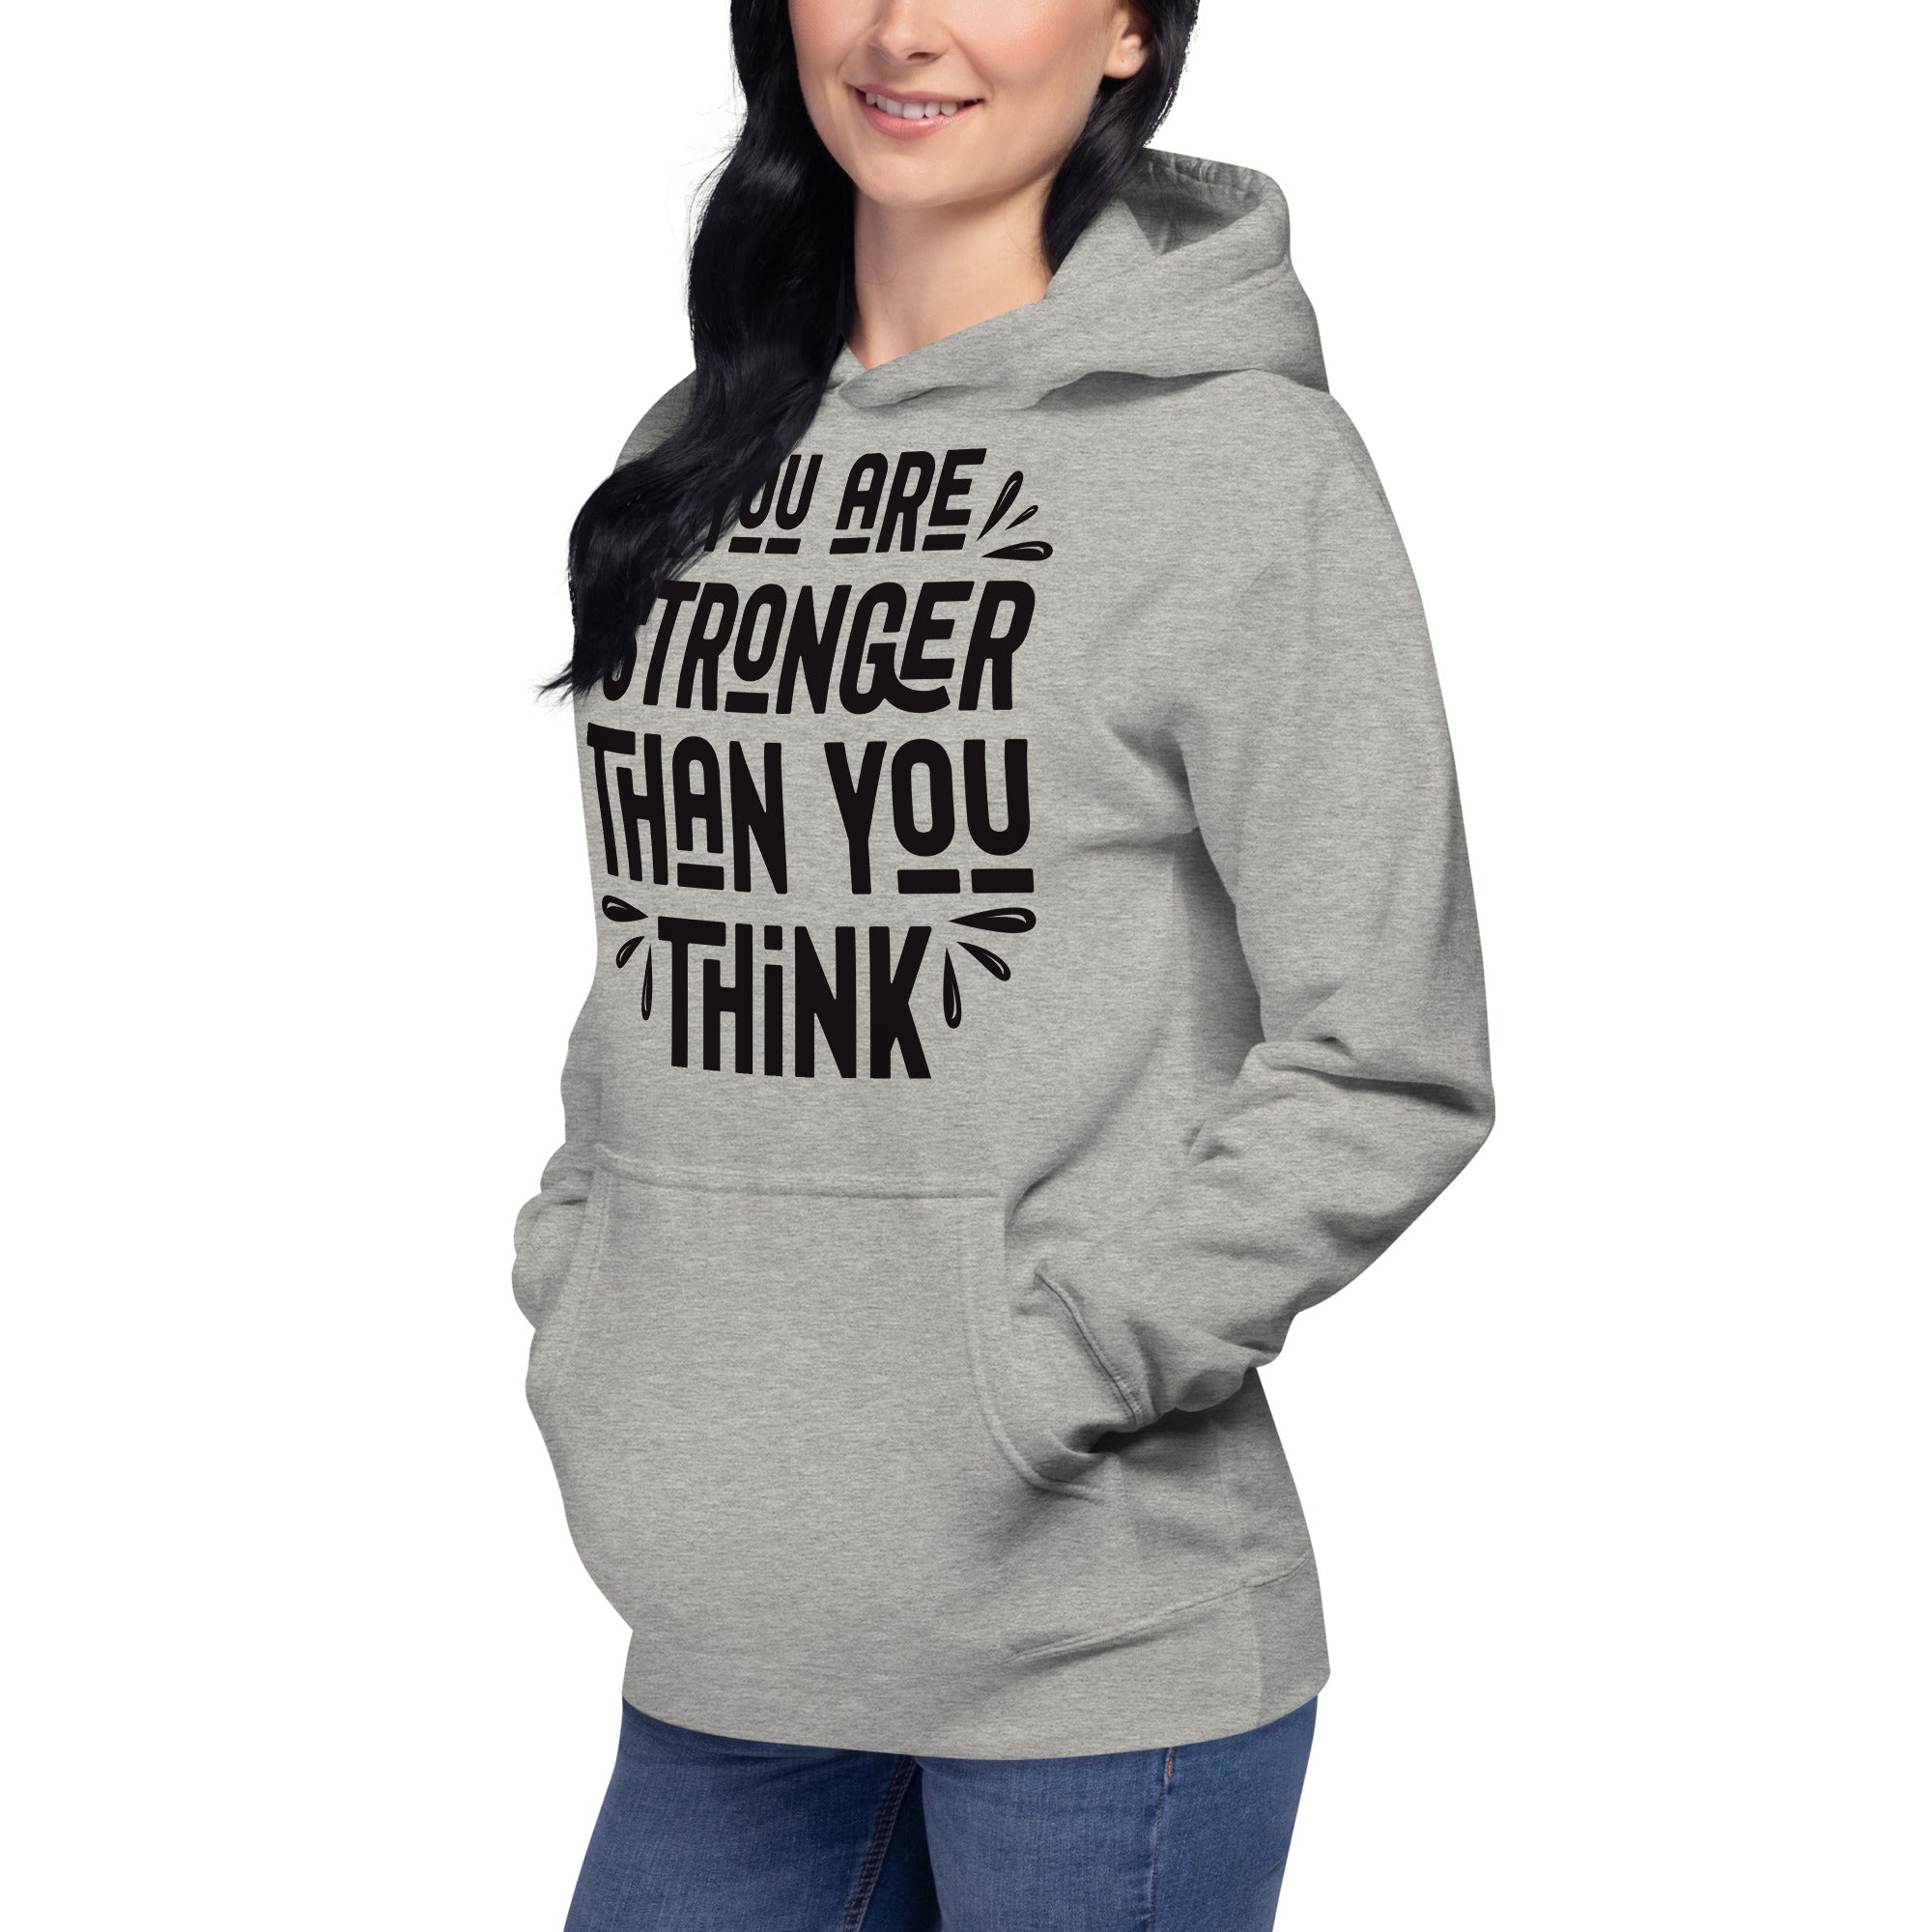 Unisex Hoodie, (Stronger then you think) Back to School, Gift, Travel